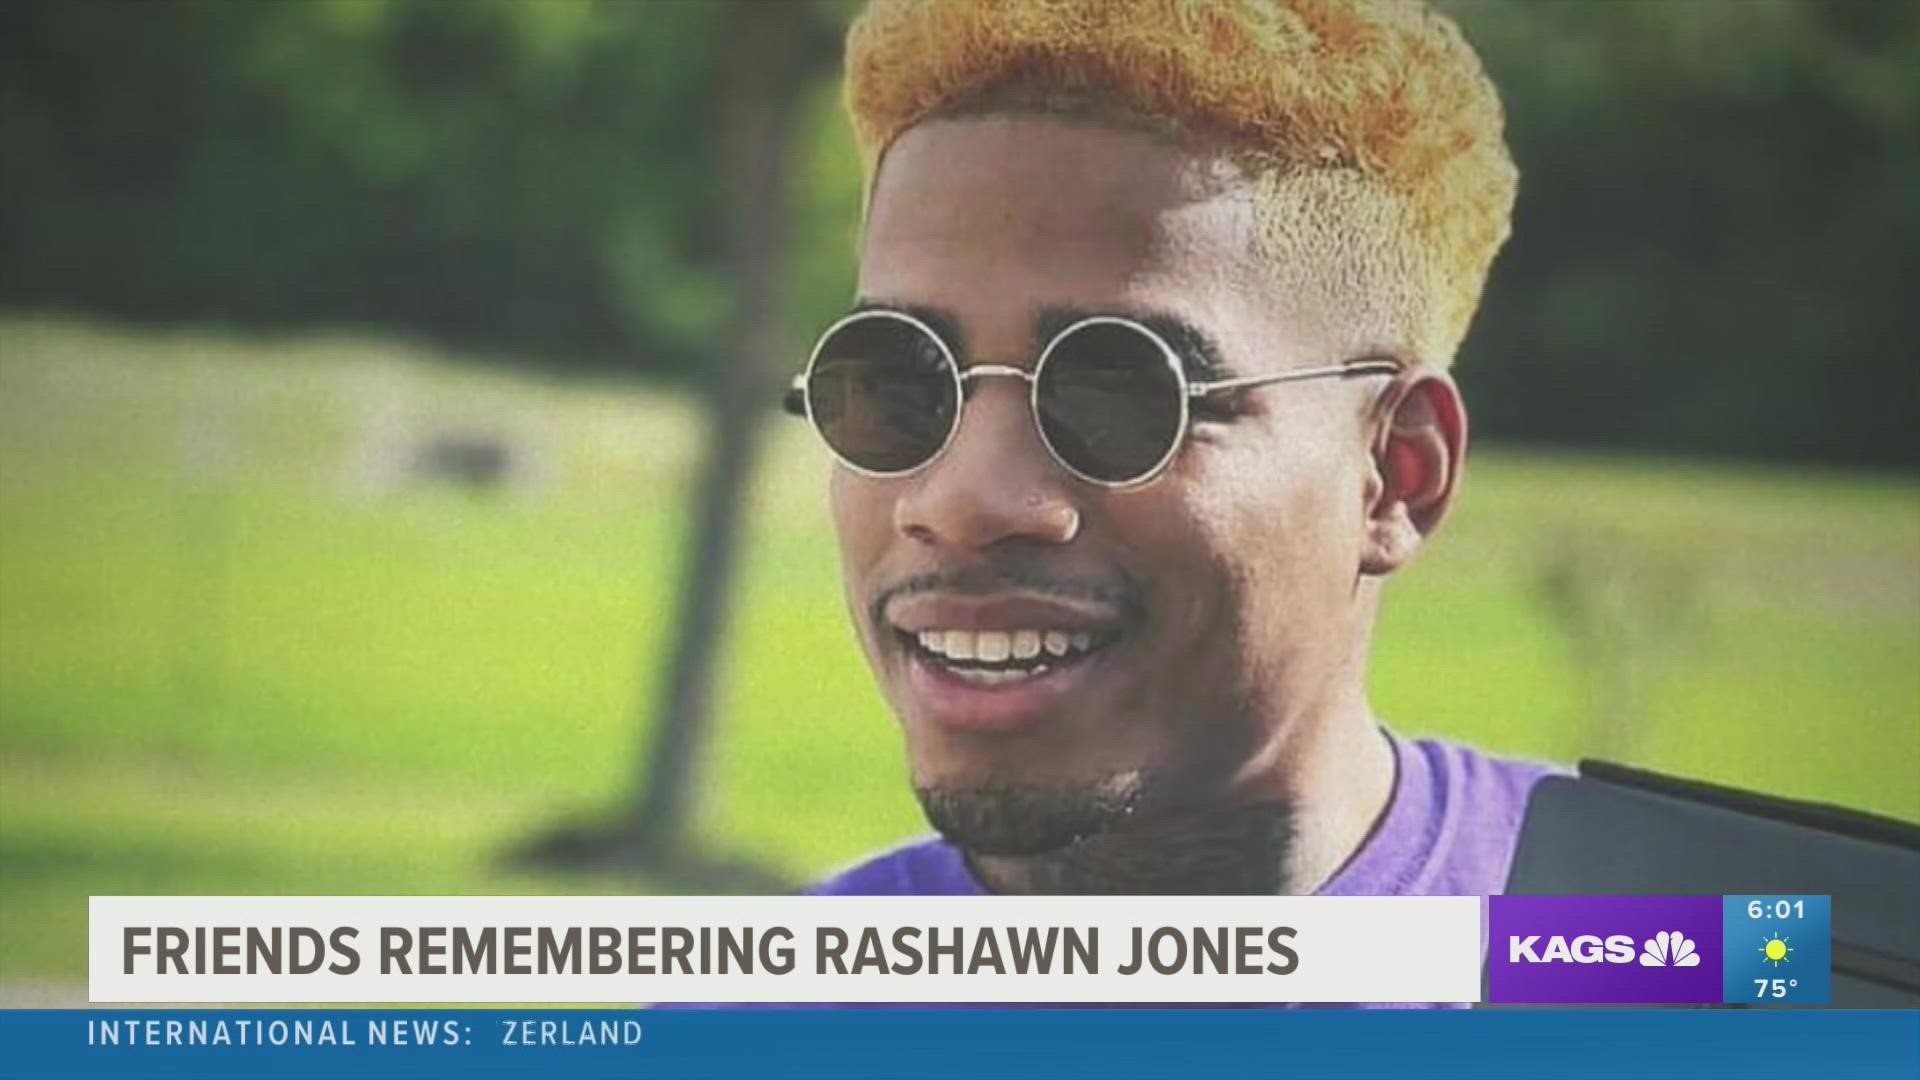 Rashawn Jones would have graduated Barber school the week of Jan. 16, 2023, but was killed in a home invasion that took place on Jan. 3